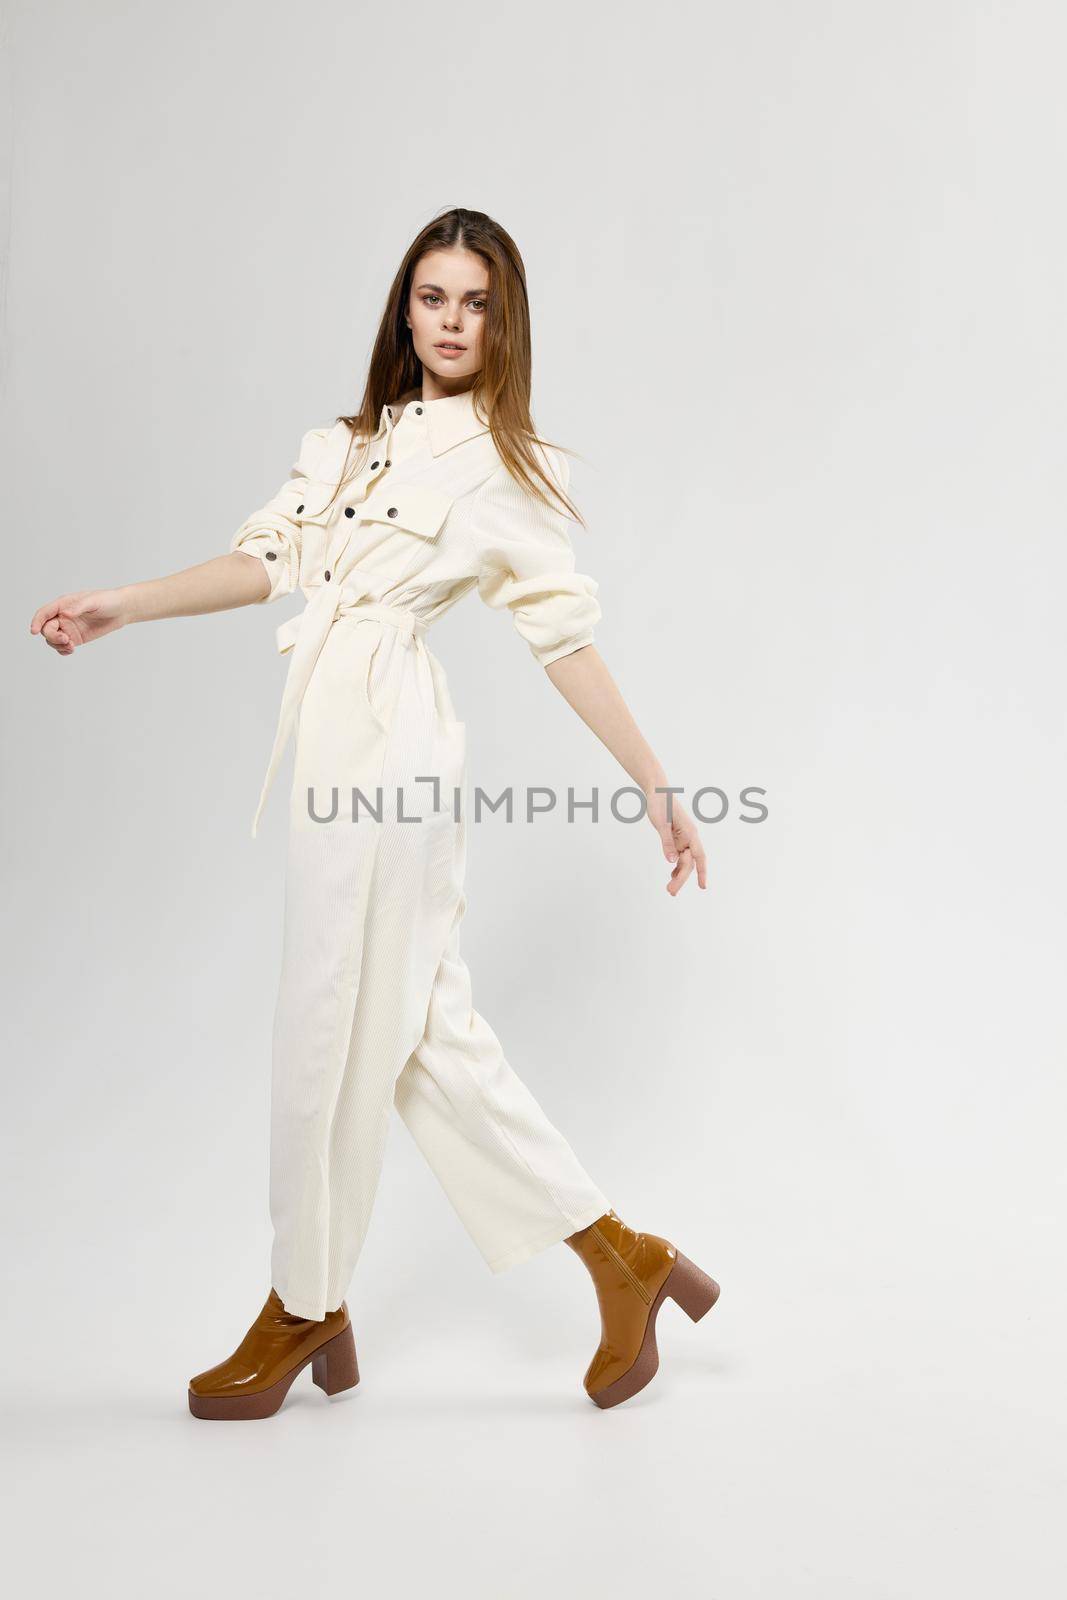 fashionable woman in white jumpsuit on a light background stylish clothes emotions model by SHOTPRIME